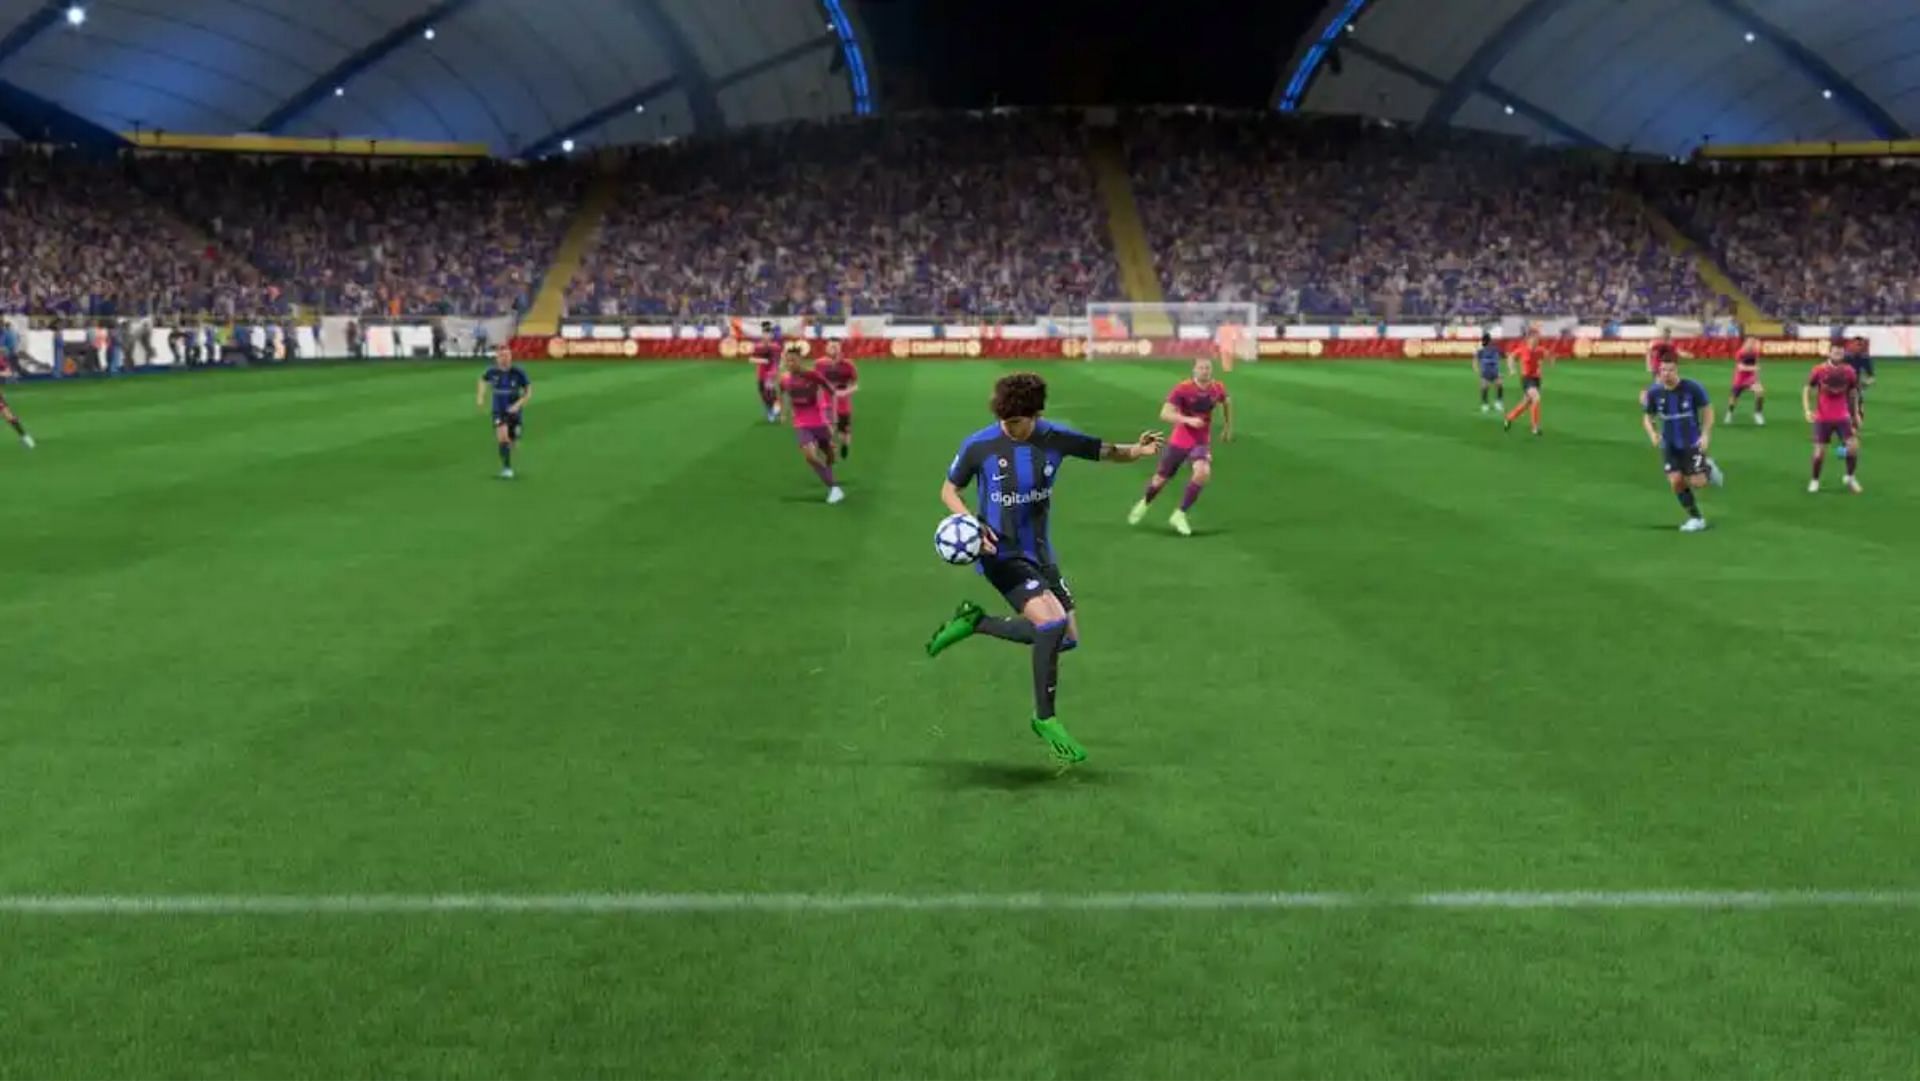 The Rainbow Flick adds plenty of value in FIFA 23 once the controls are learnt (Image via EA Sports)